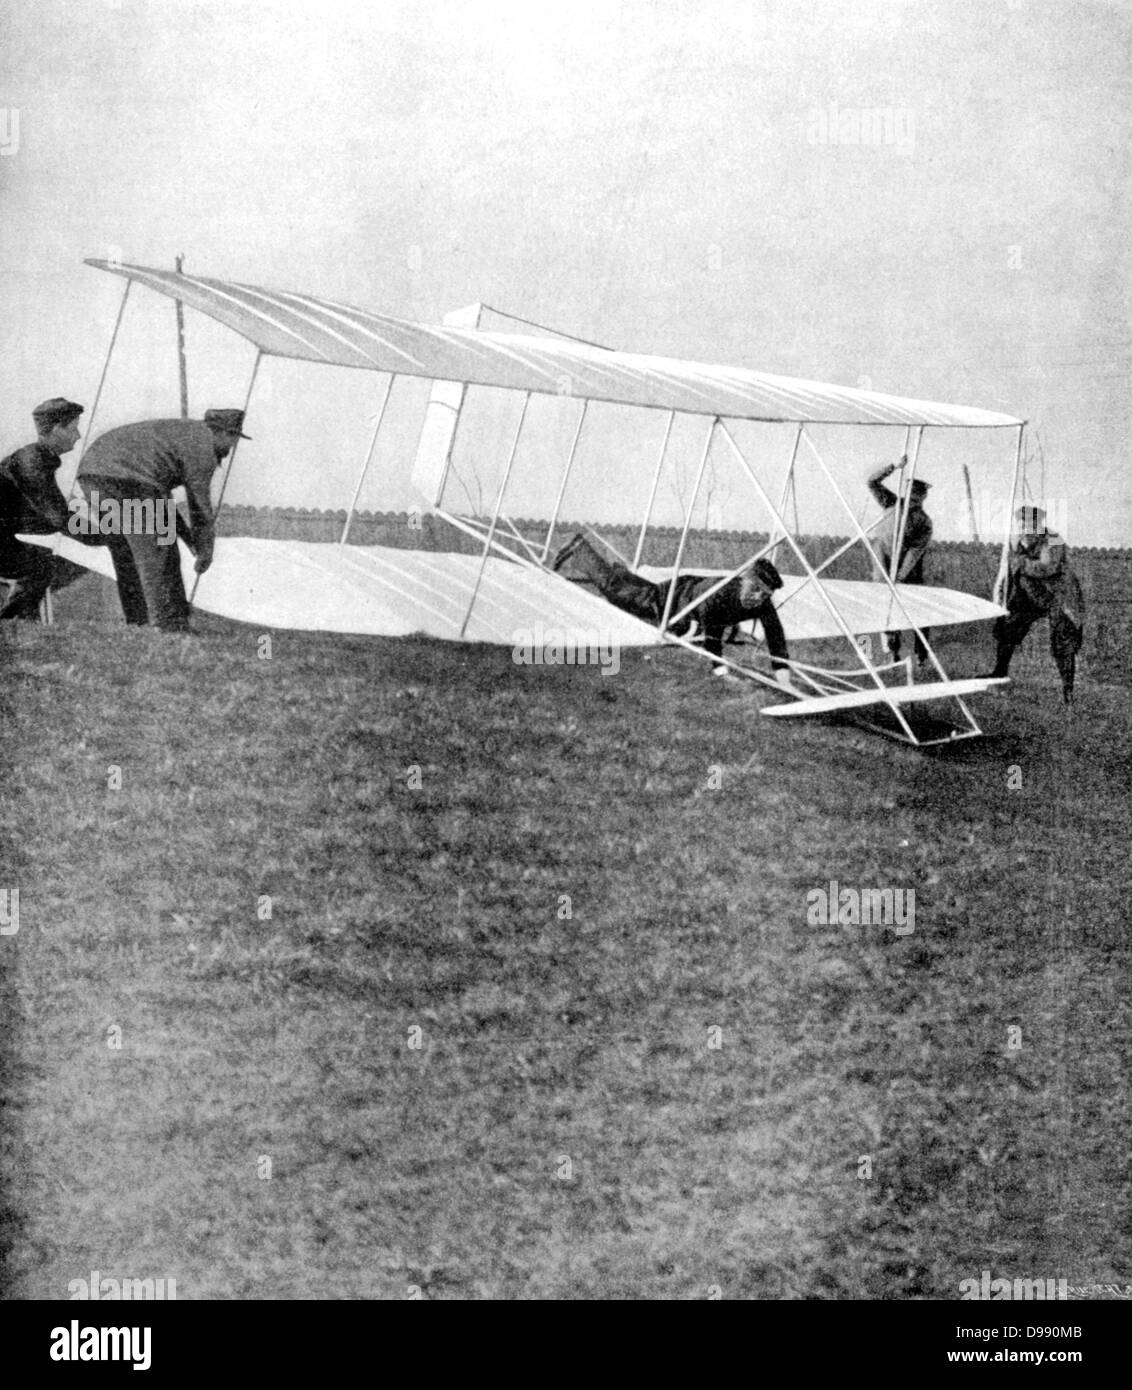 Ernest Archdeacon (1863-1950) French lawyer and aviation pioneer in the take-off position in his copy of a Wright glider. Founder of Aero-Club de France. From 'La Vie au Grand Air', Paris, 25 February 1904. Aviator Aeronautics Stock Photo